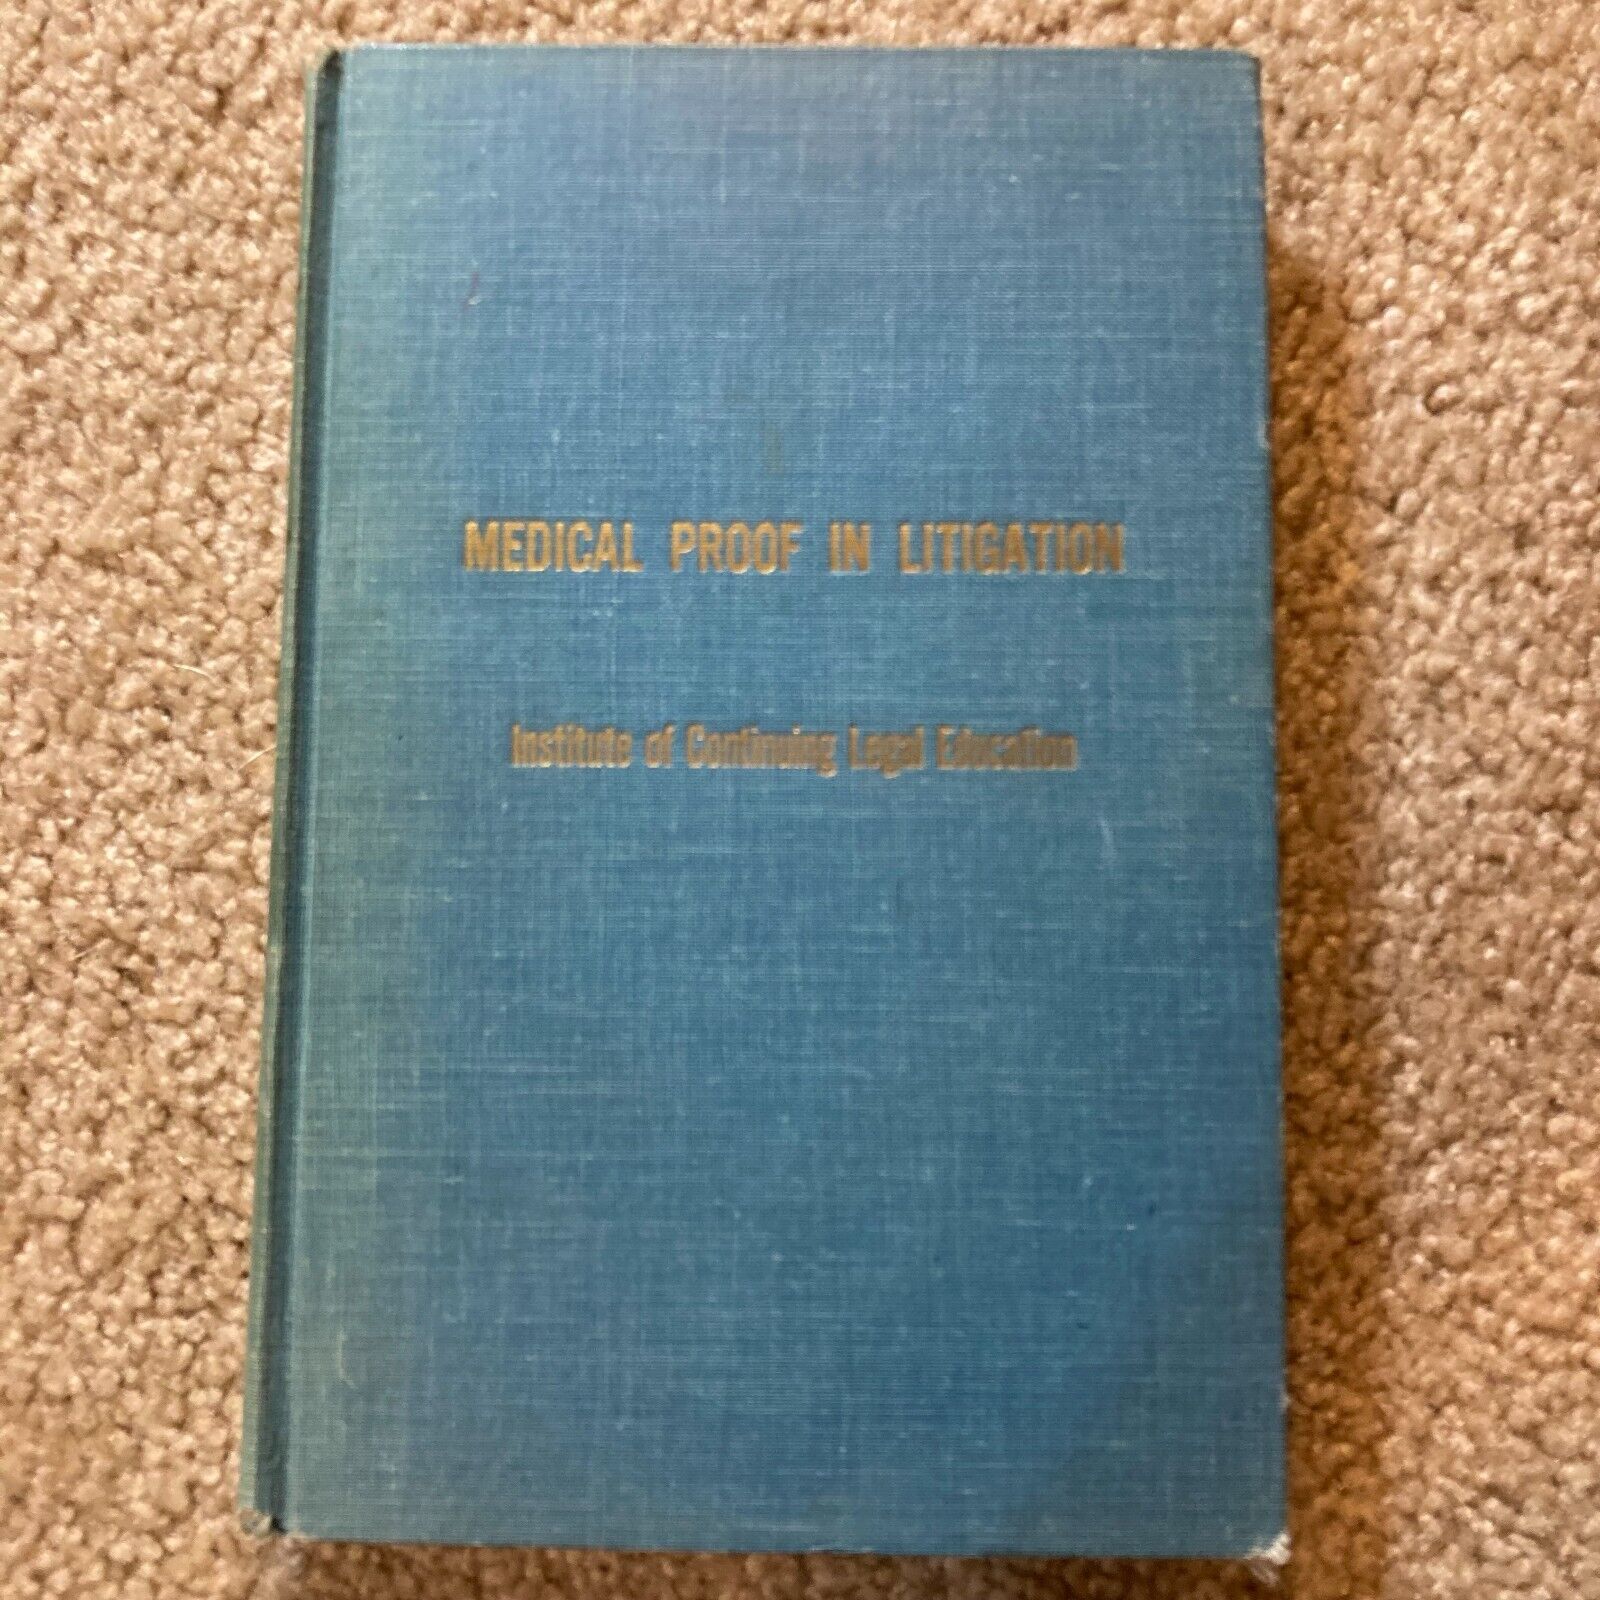 1961 Vintage Legal Book: Medical Proof In Litigation By William Curran 1961 HC